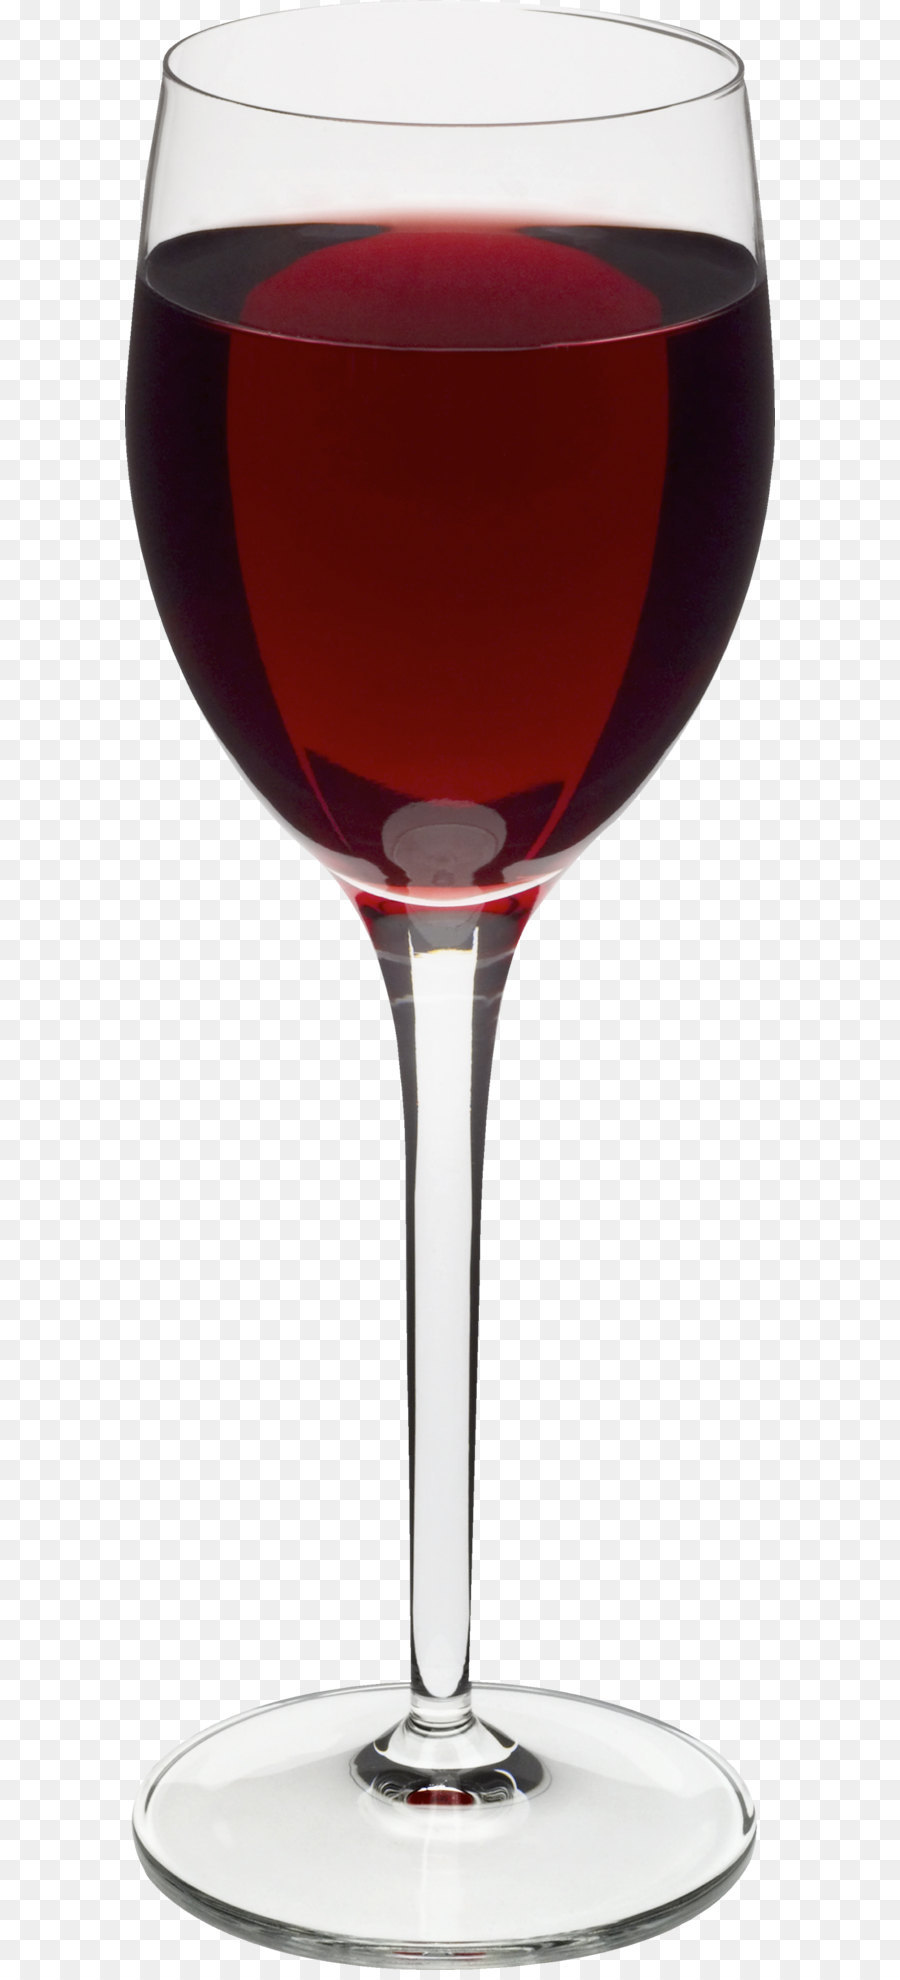 Wine glass Computer file - Wine glass PNG image png download - 1157*3506 - Free Transparent White Wine png Download.